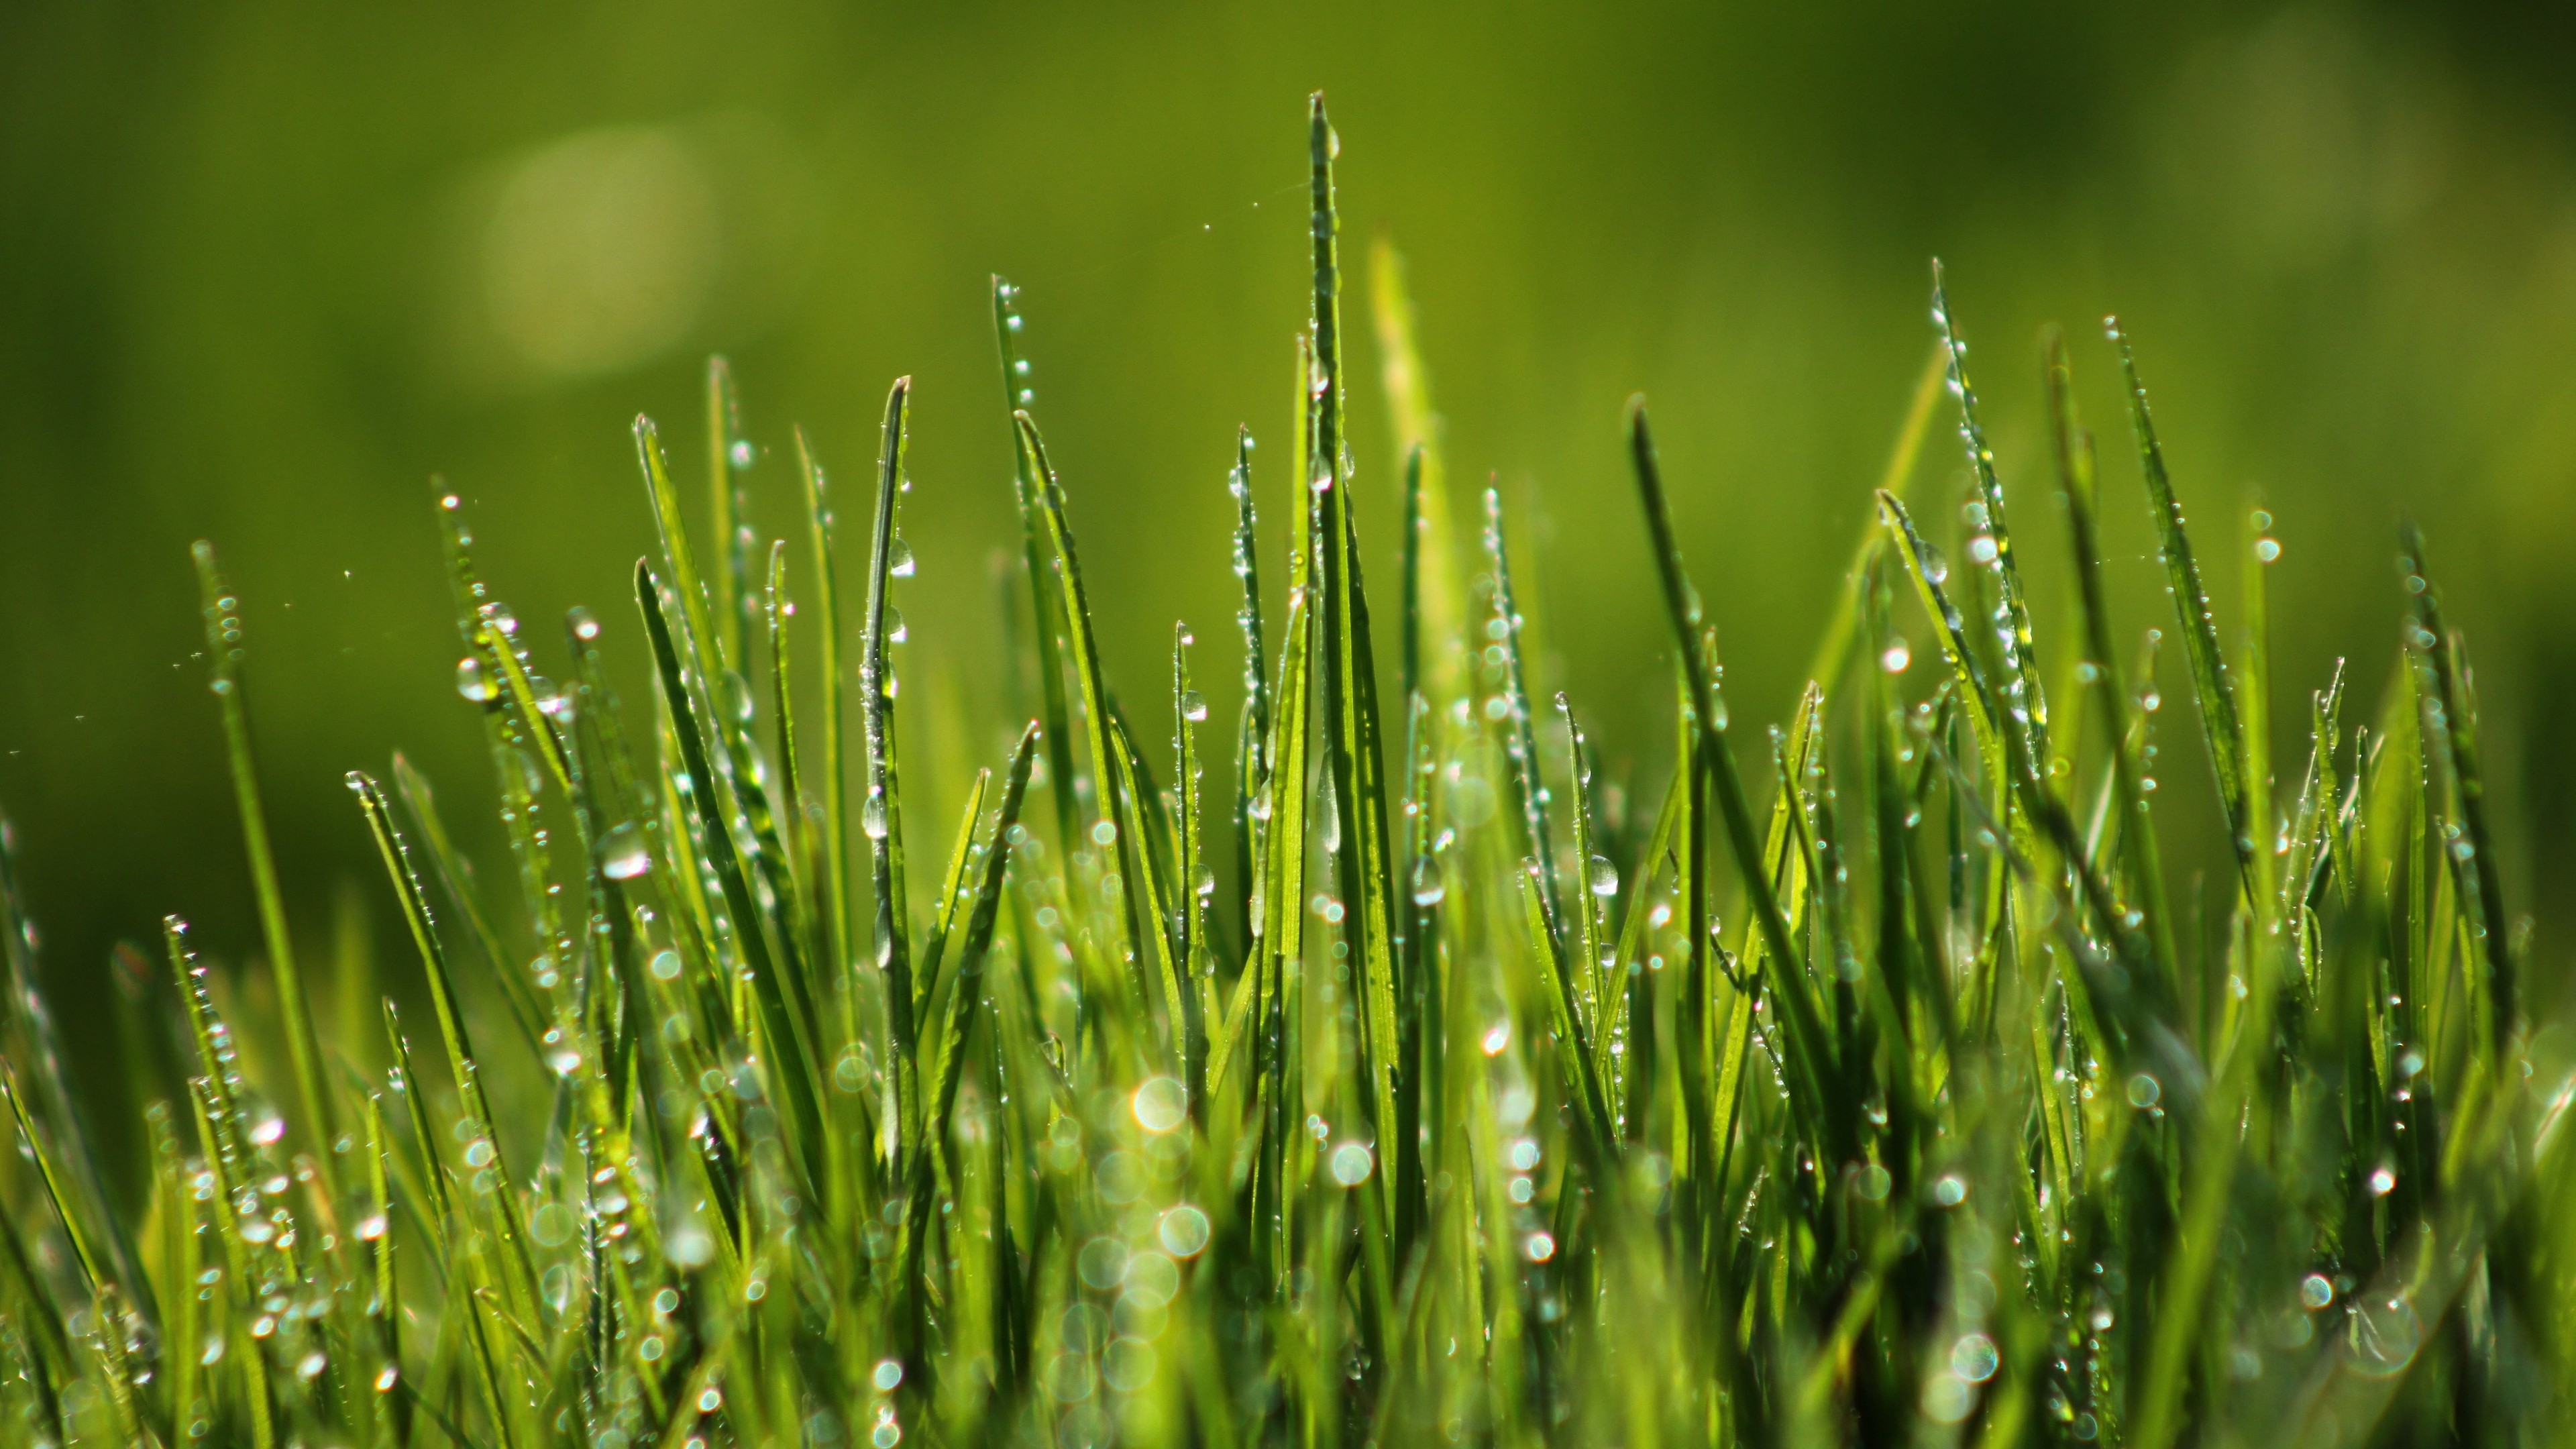  Texture Green Real Grass Field Background HD Images Free  CBEditz